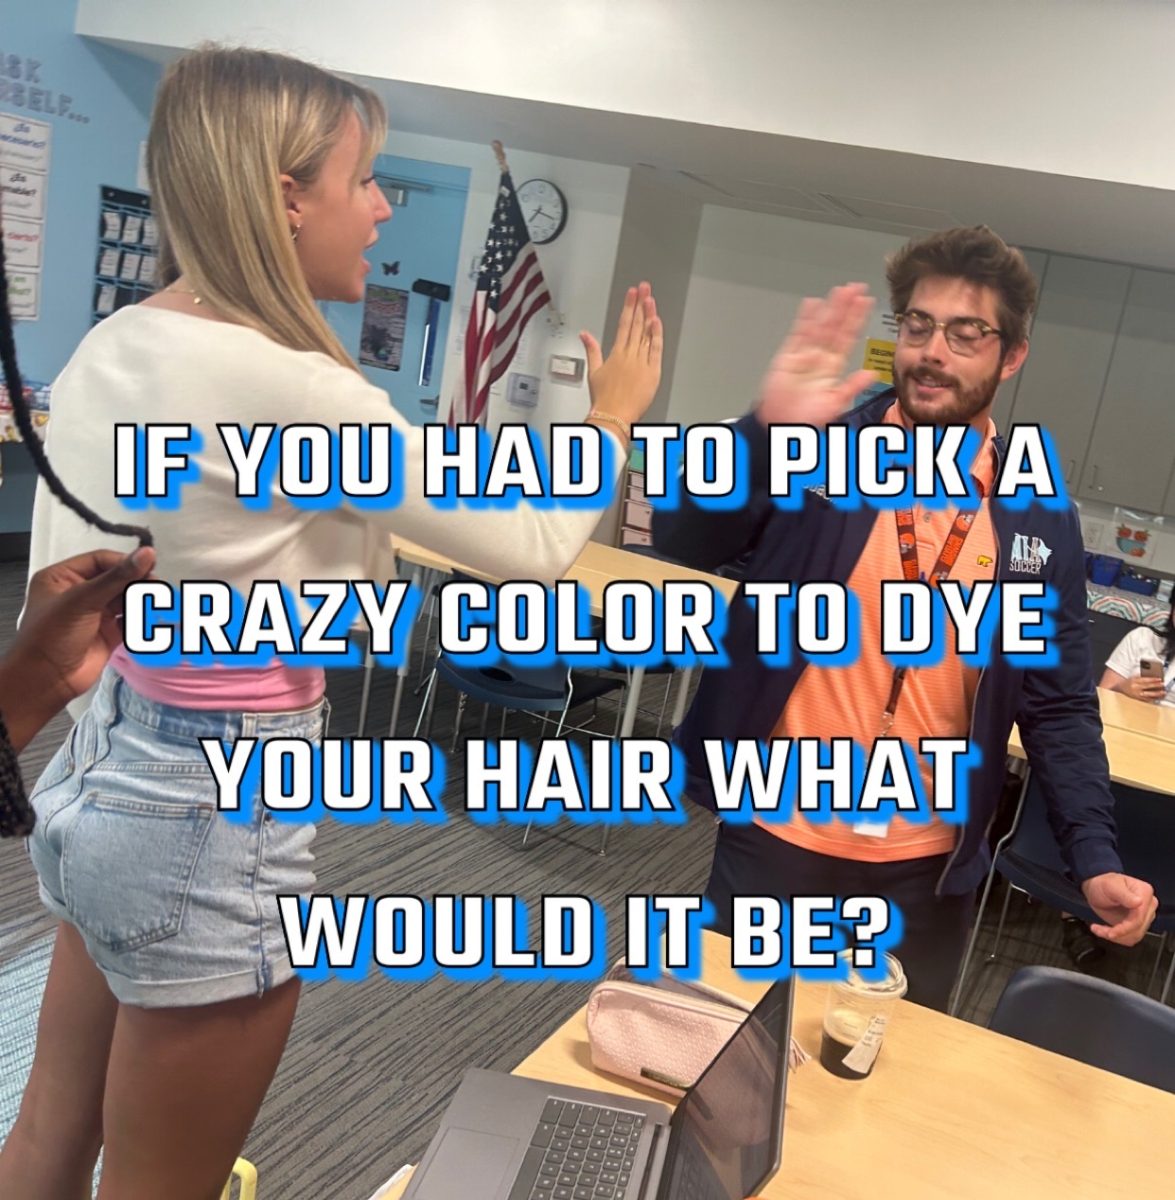 If You Had To Pick A Crazy Color To Dye Your Hair, What Would It Be?